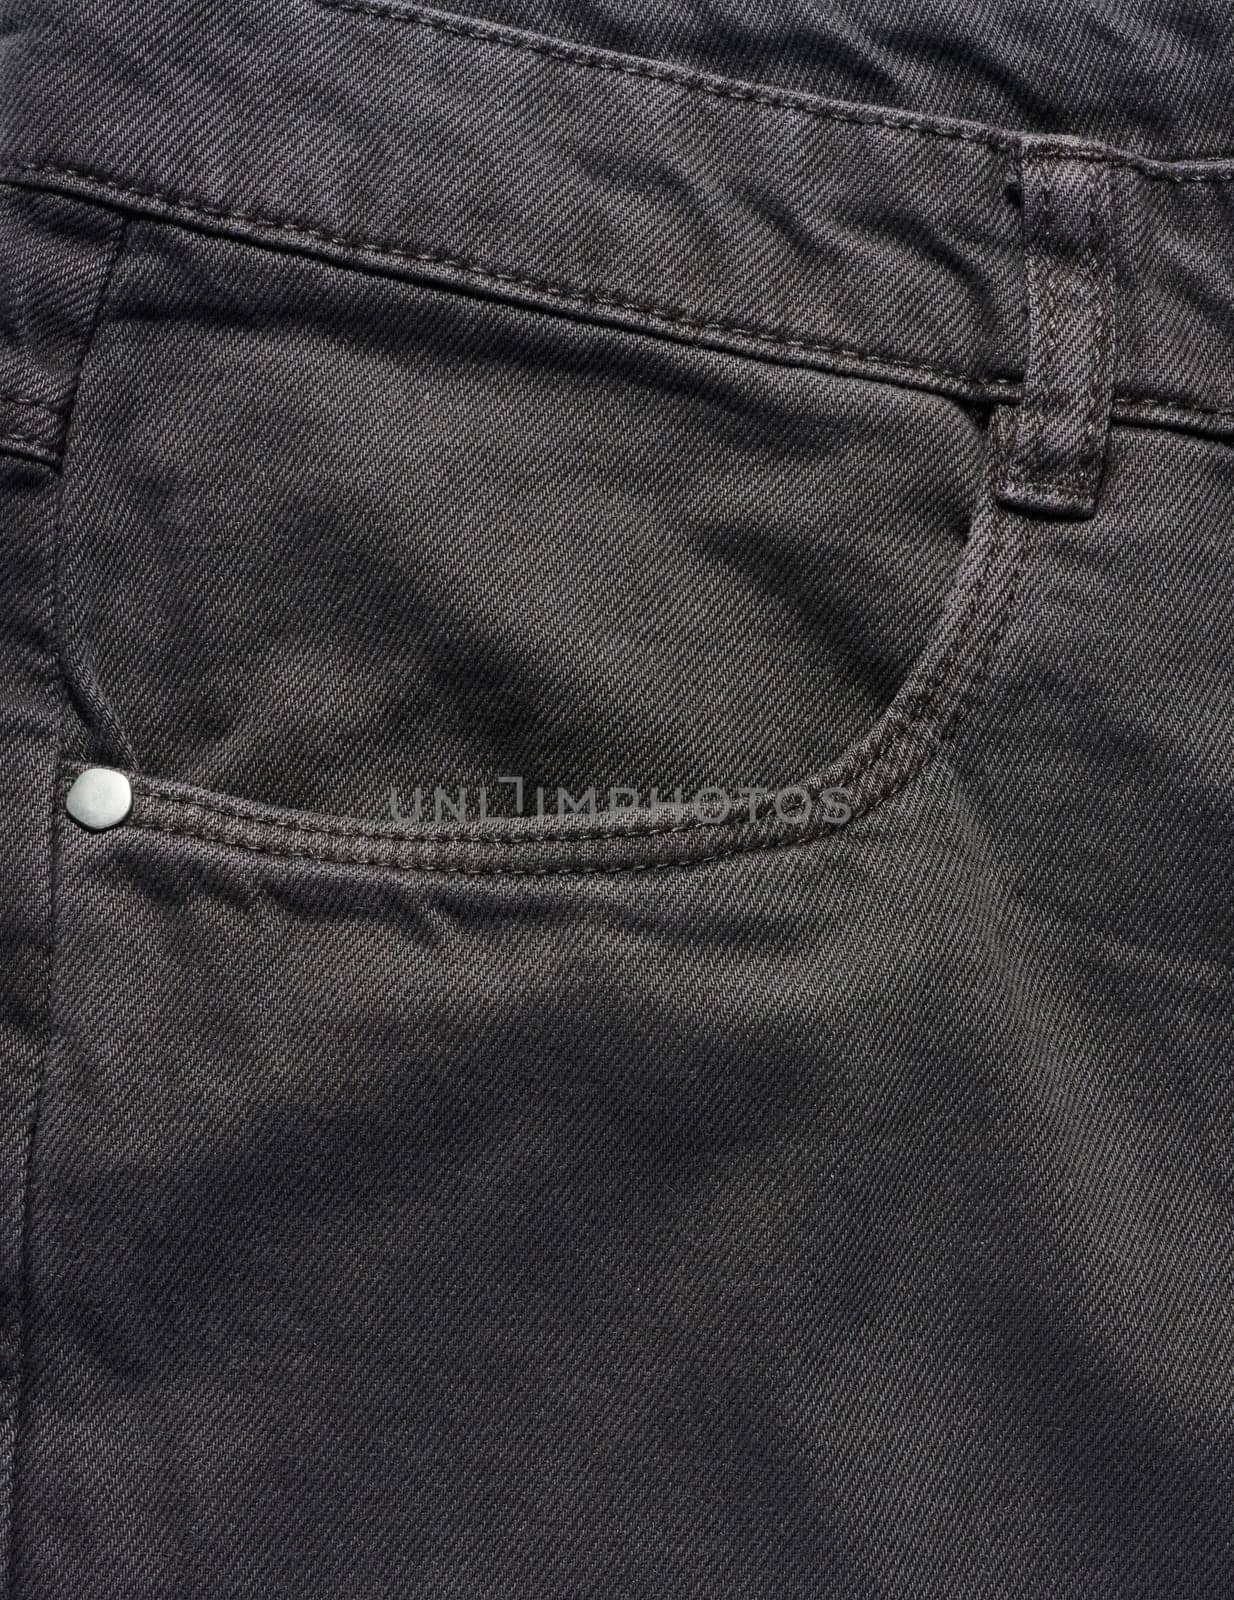 Black jeans front pocket with buttons, close up by ndanko